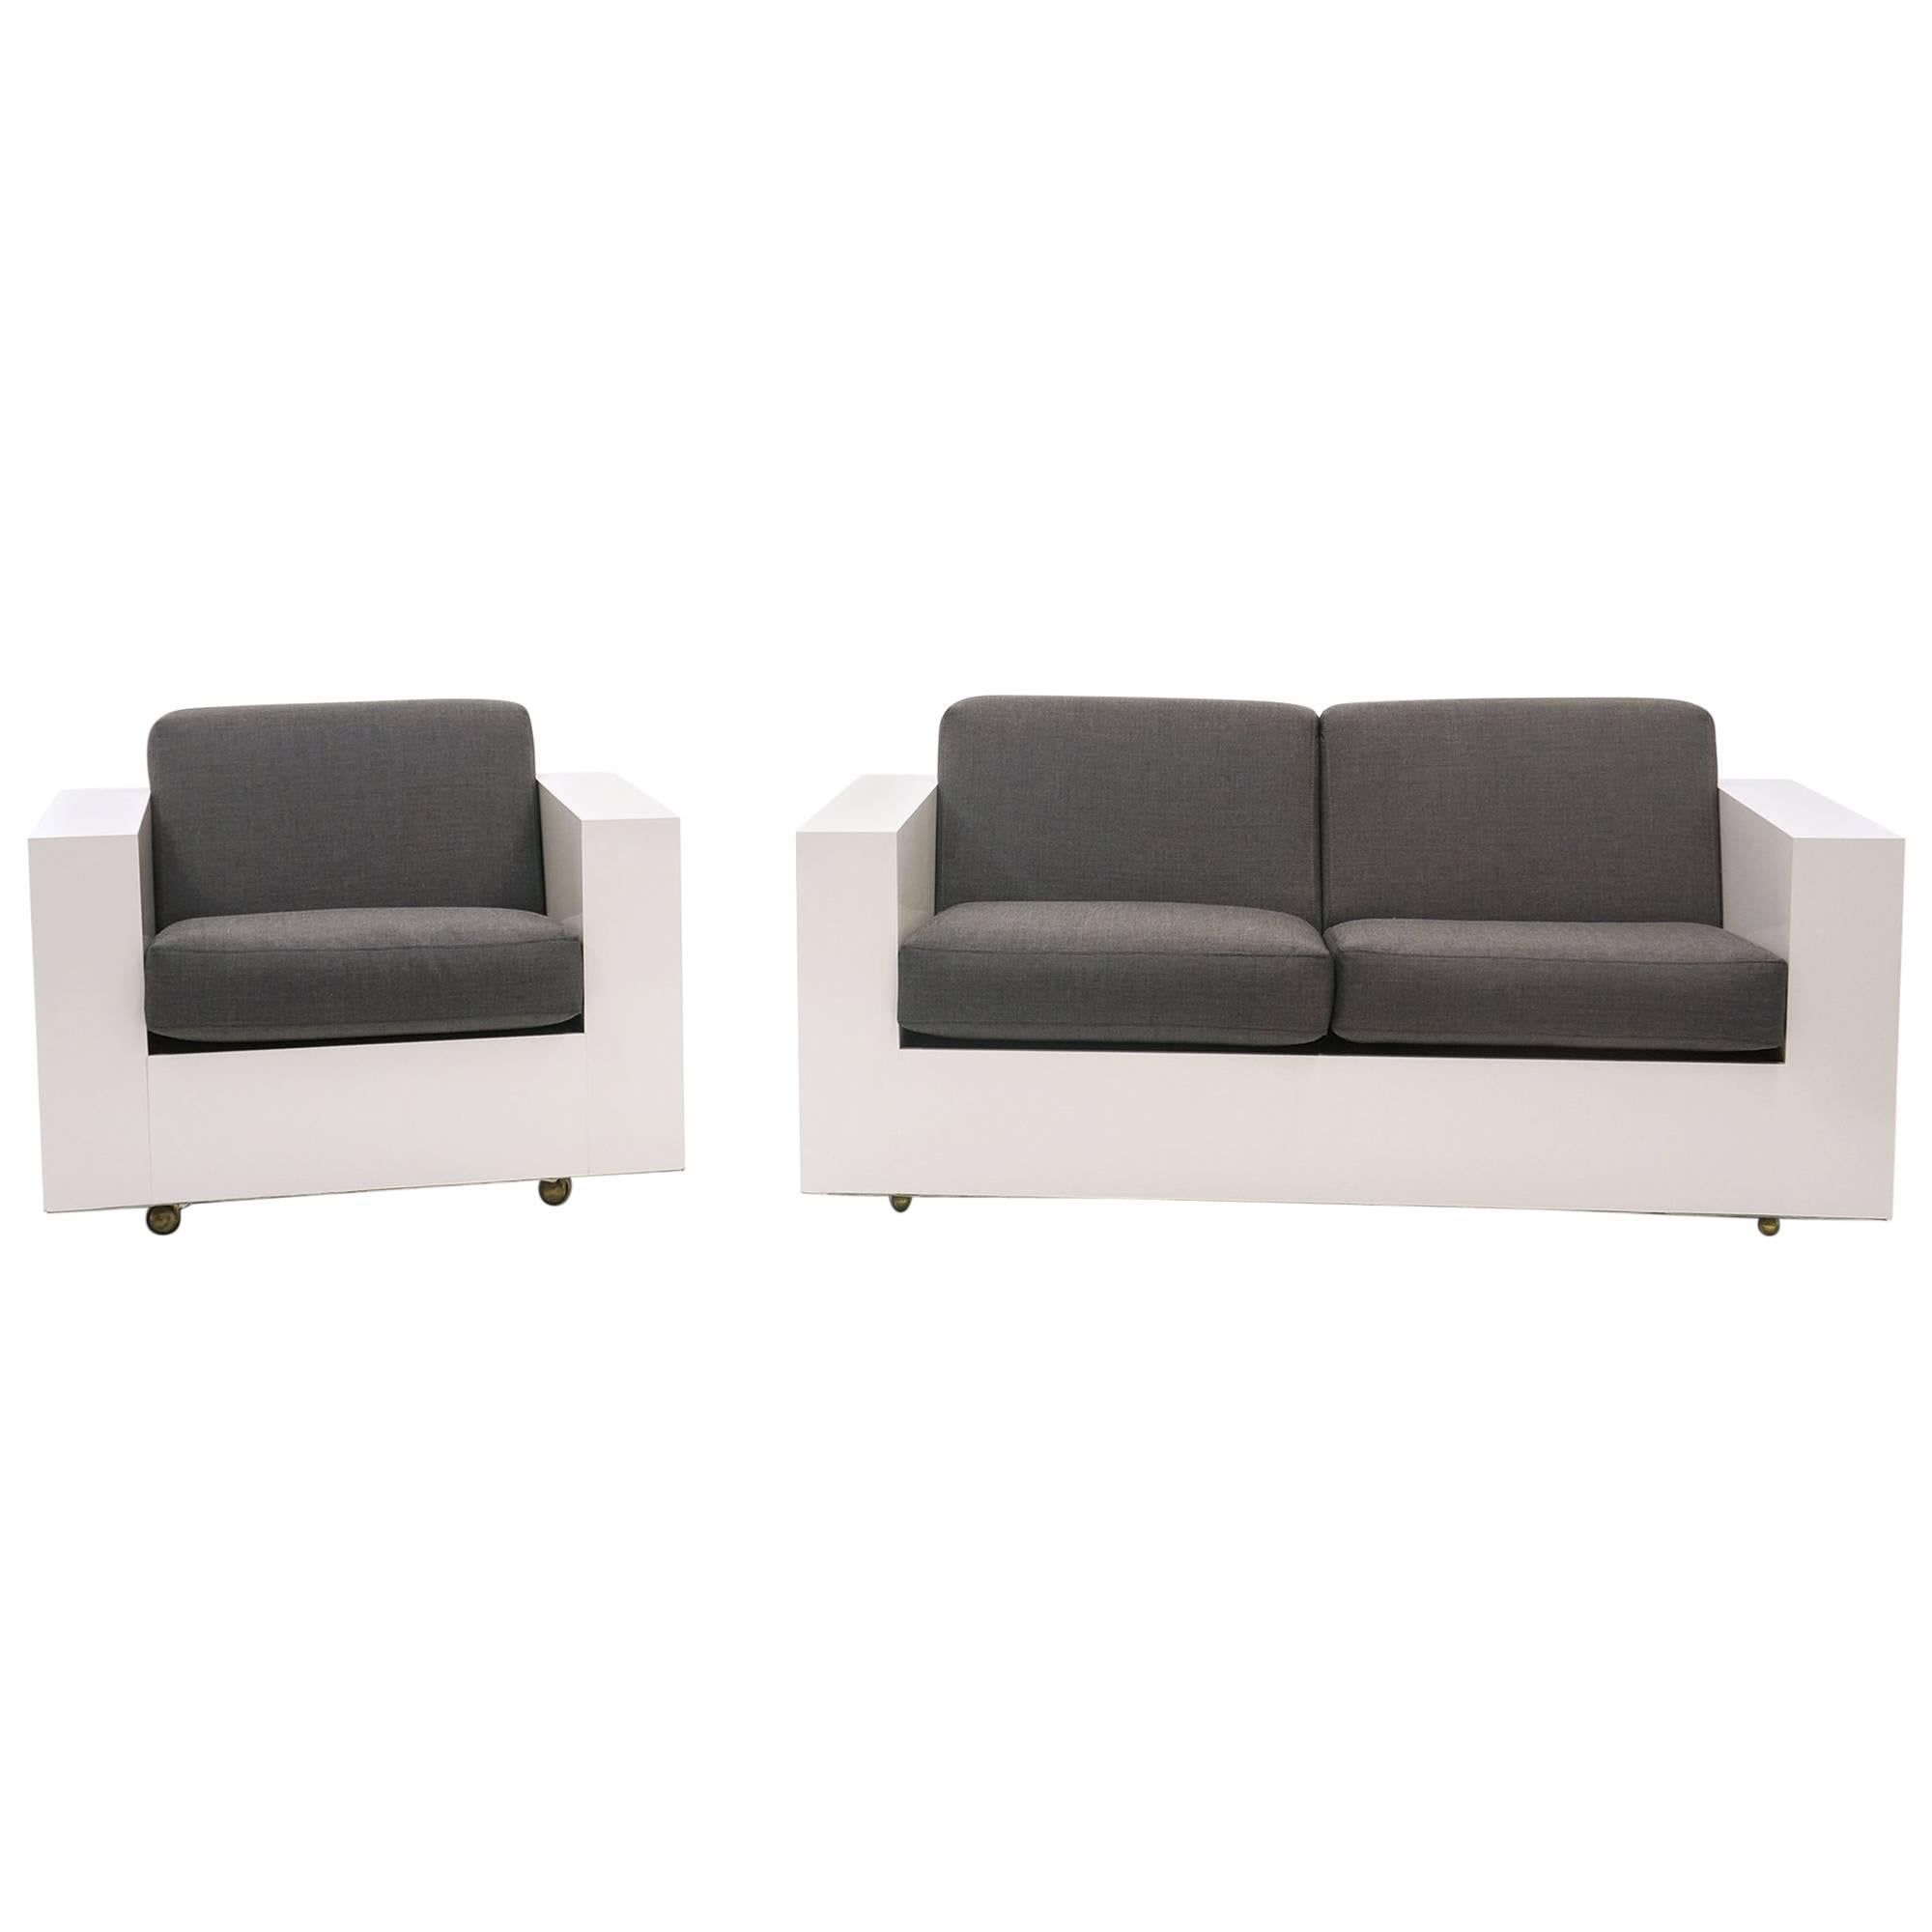 Loveseat and Chair by Milo Baughman for Thayer Coggin, White Laminate Case For Sale